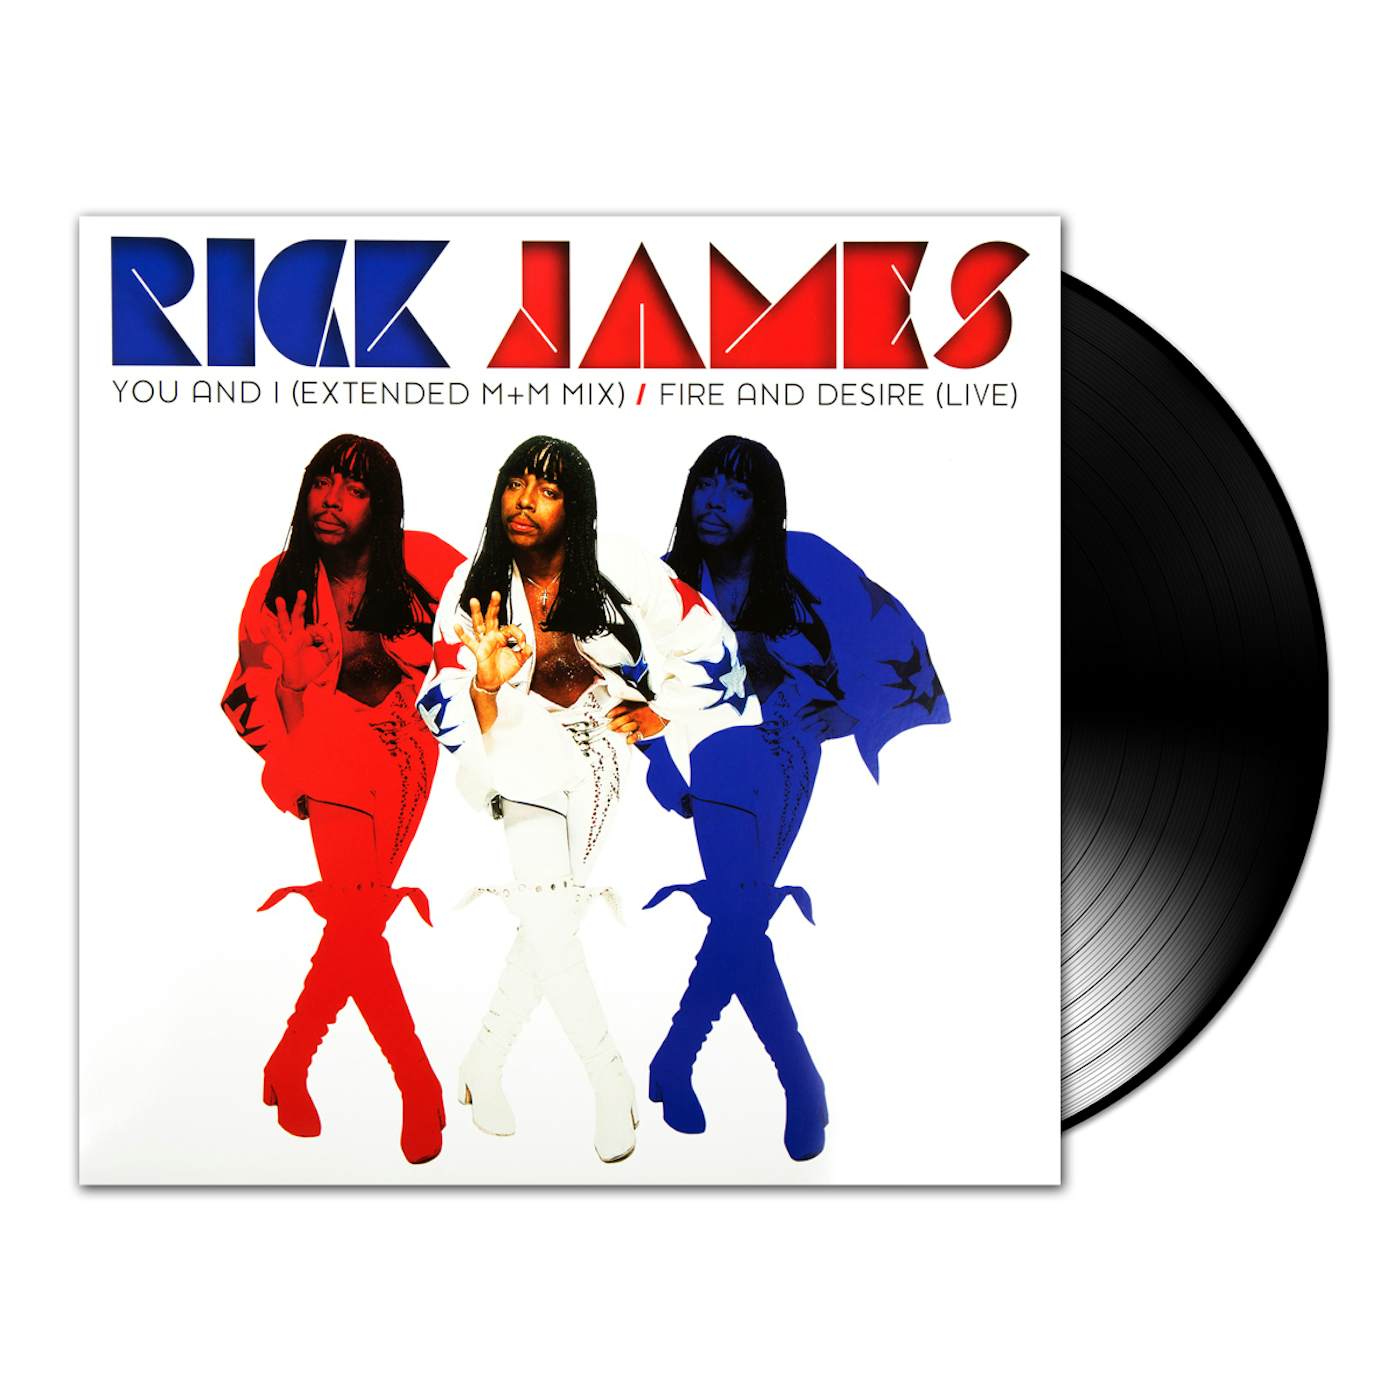 Rick James 12" Vinyl (Side 1 - Fire and Desire, side 2 You and I)